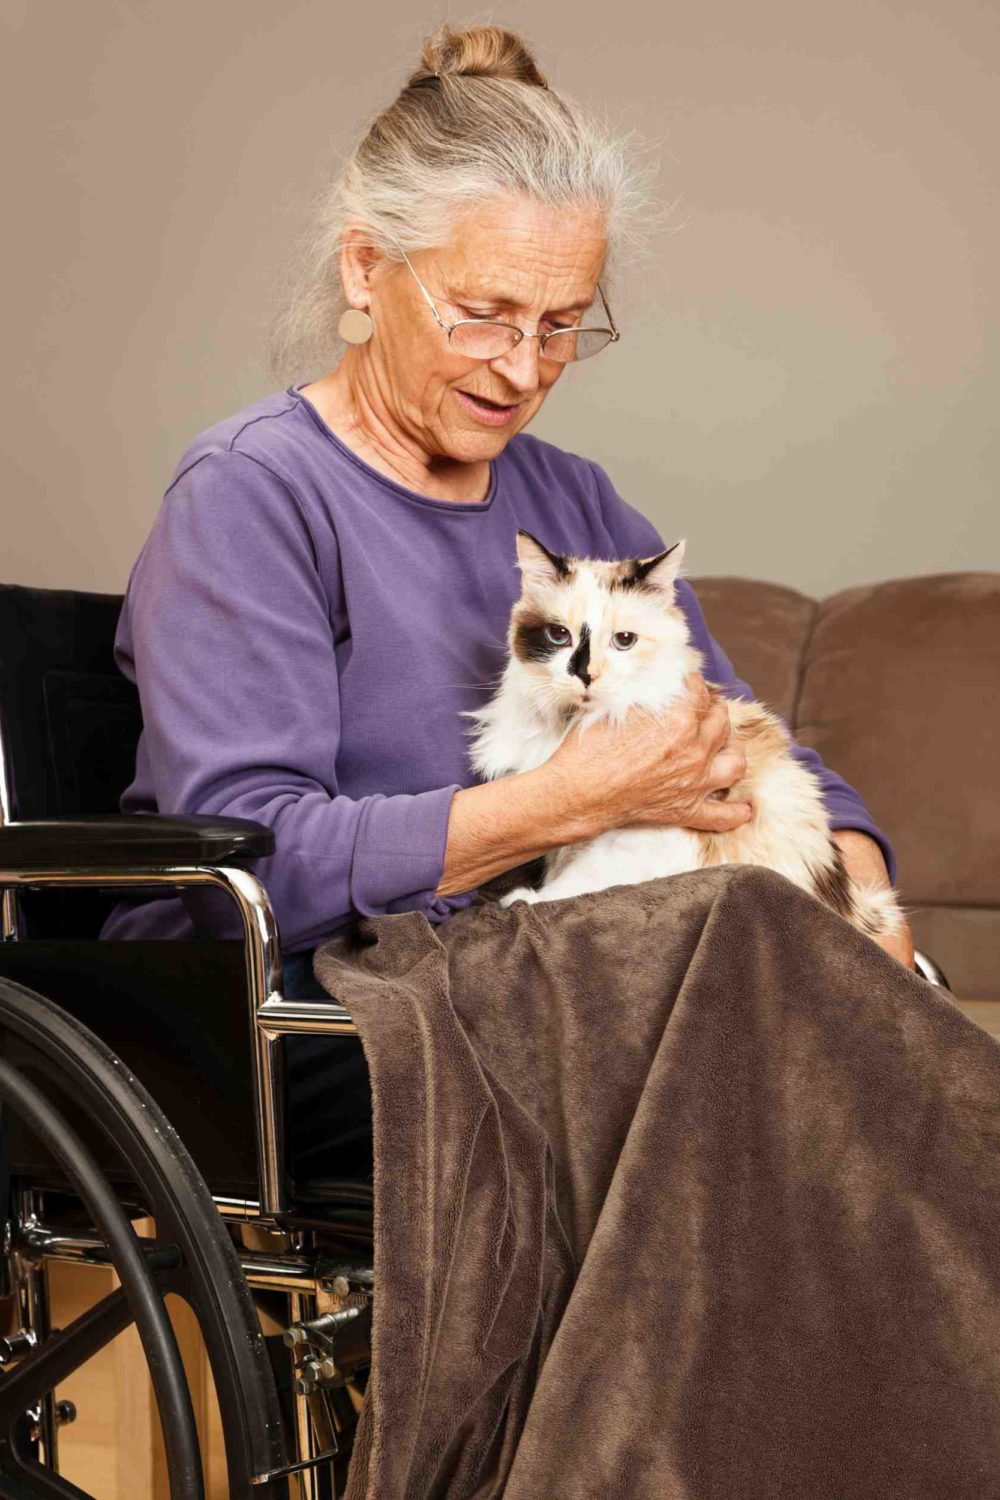 Questions To Ask Yourself Before Moving A Loved One Into A Care Home